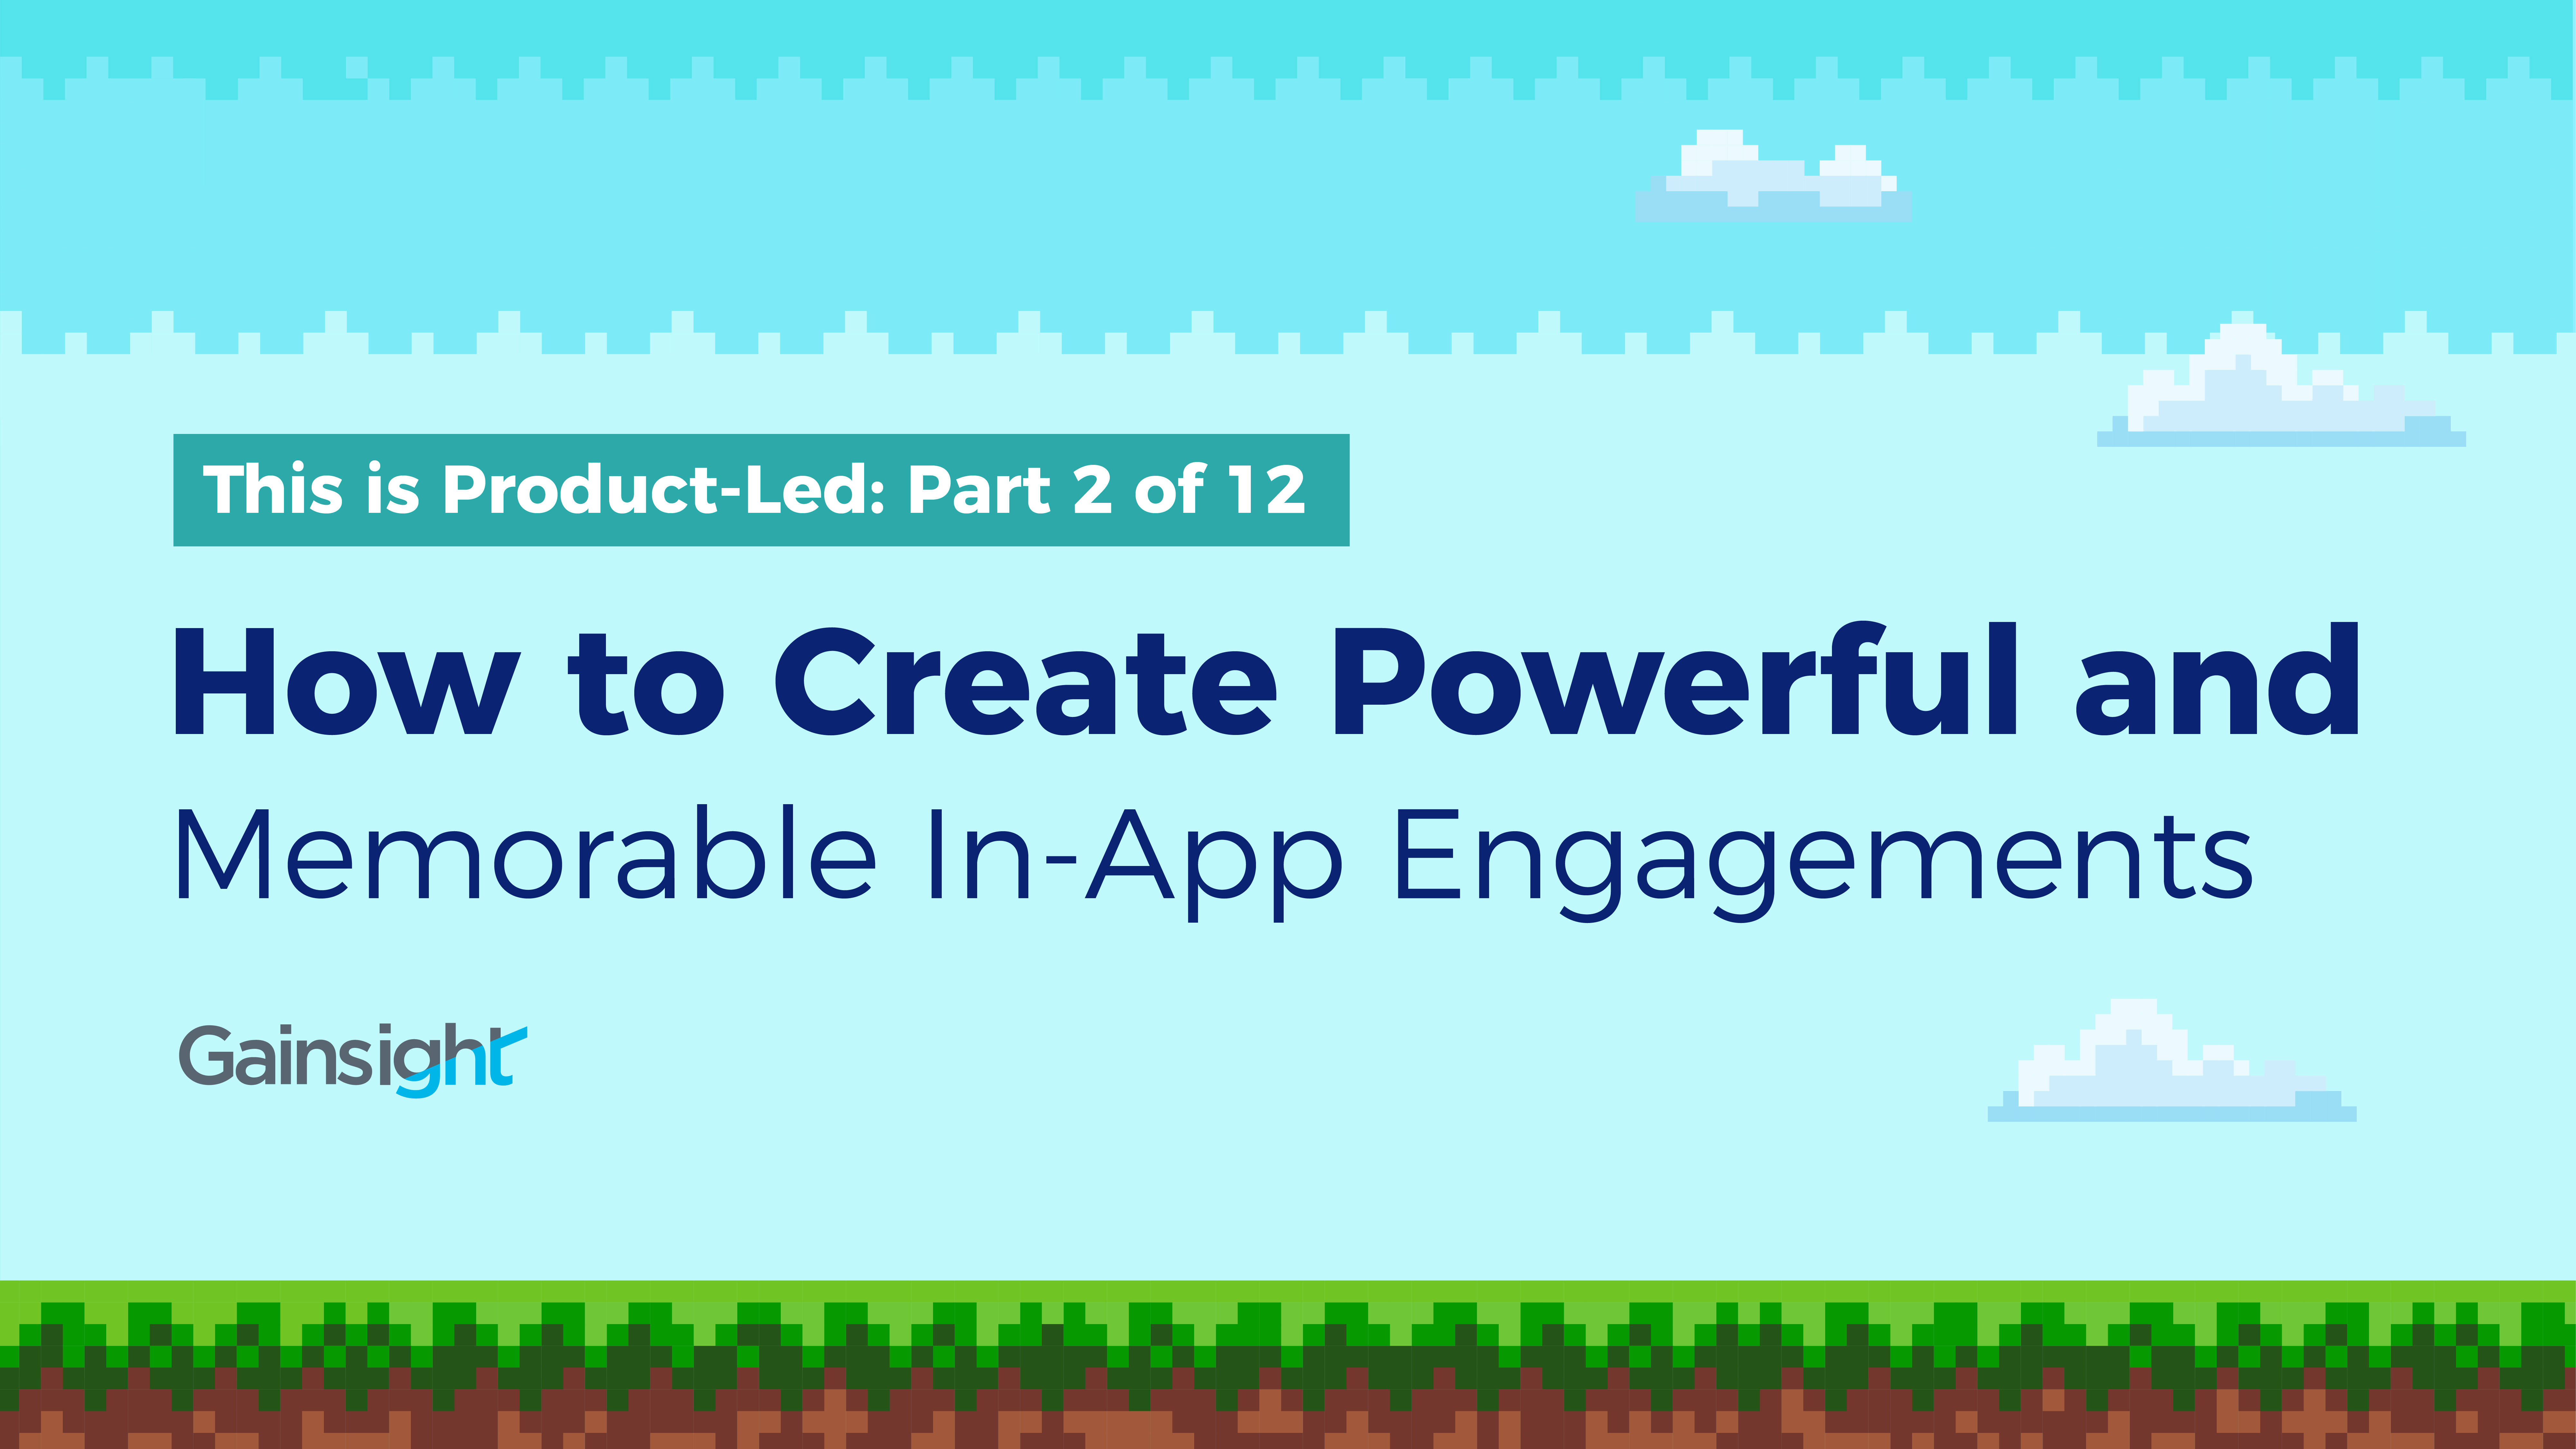 How to Create Powerful and Memorable In-App Engagements Image